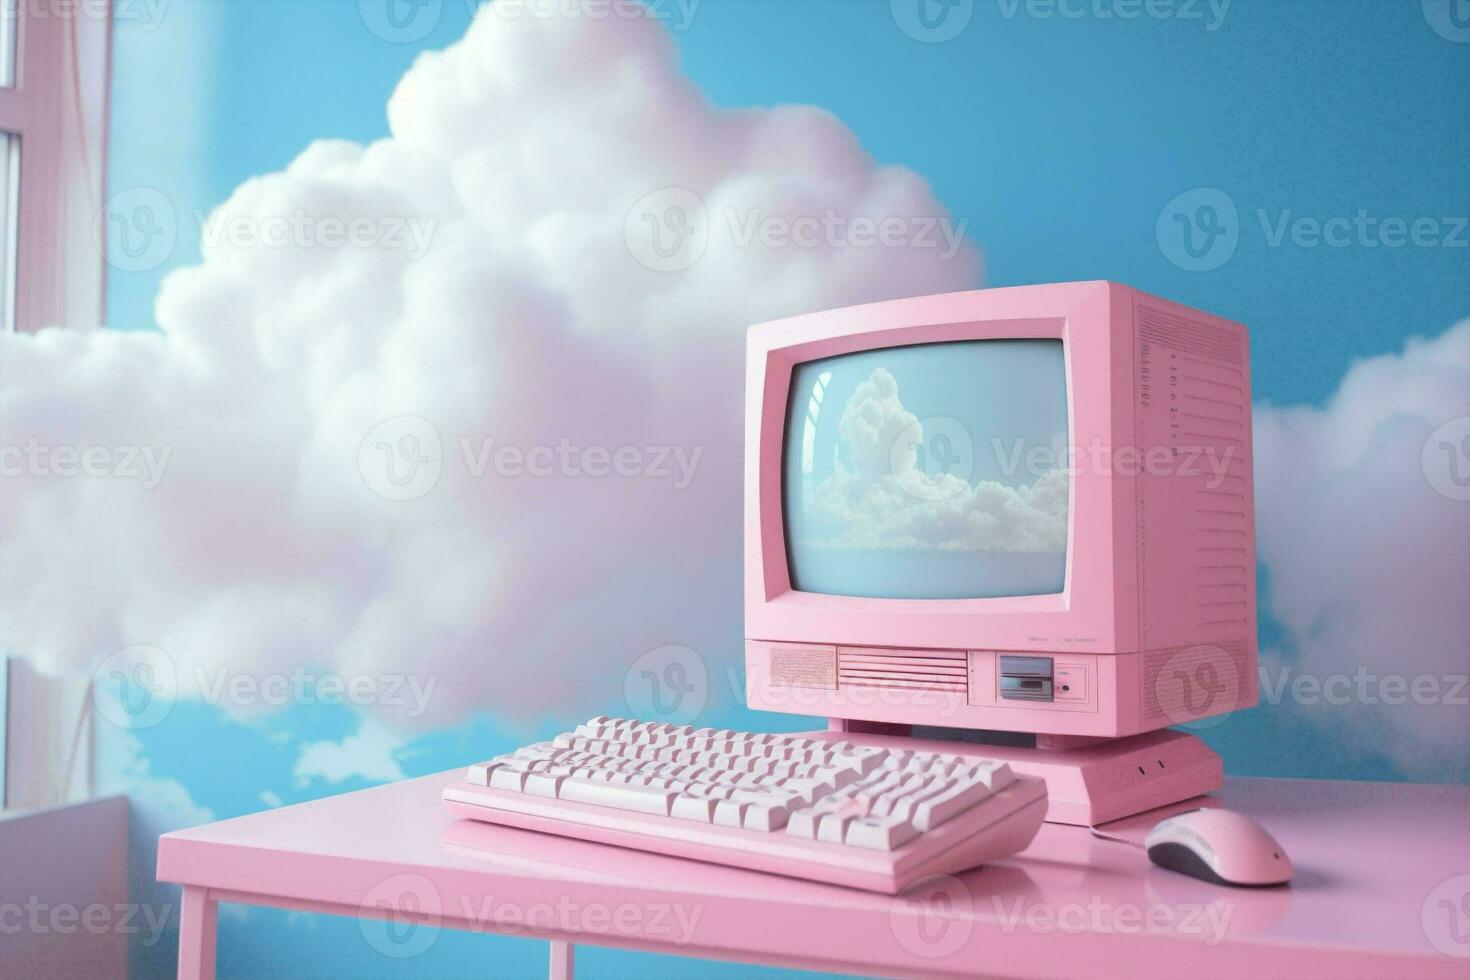 Cyberspace blue office concept monitor computer pink equipment digital retro workplace keyboard technology photo